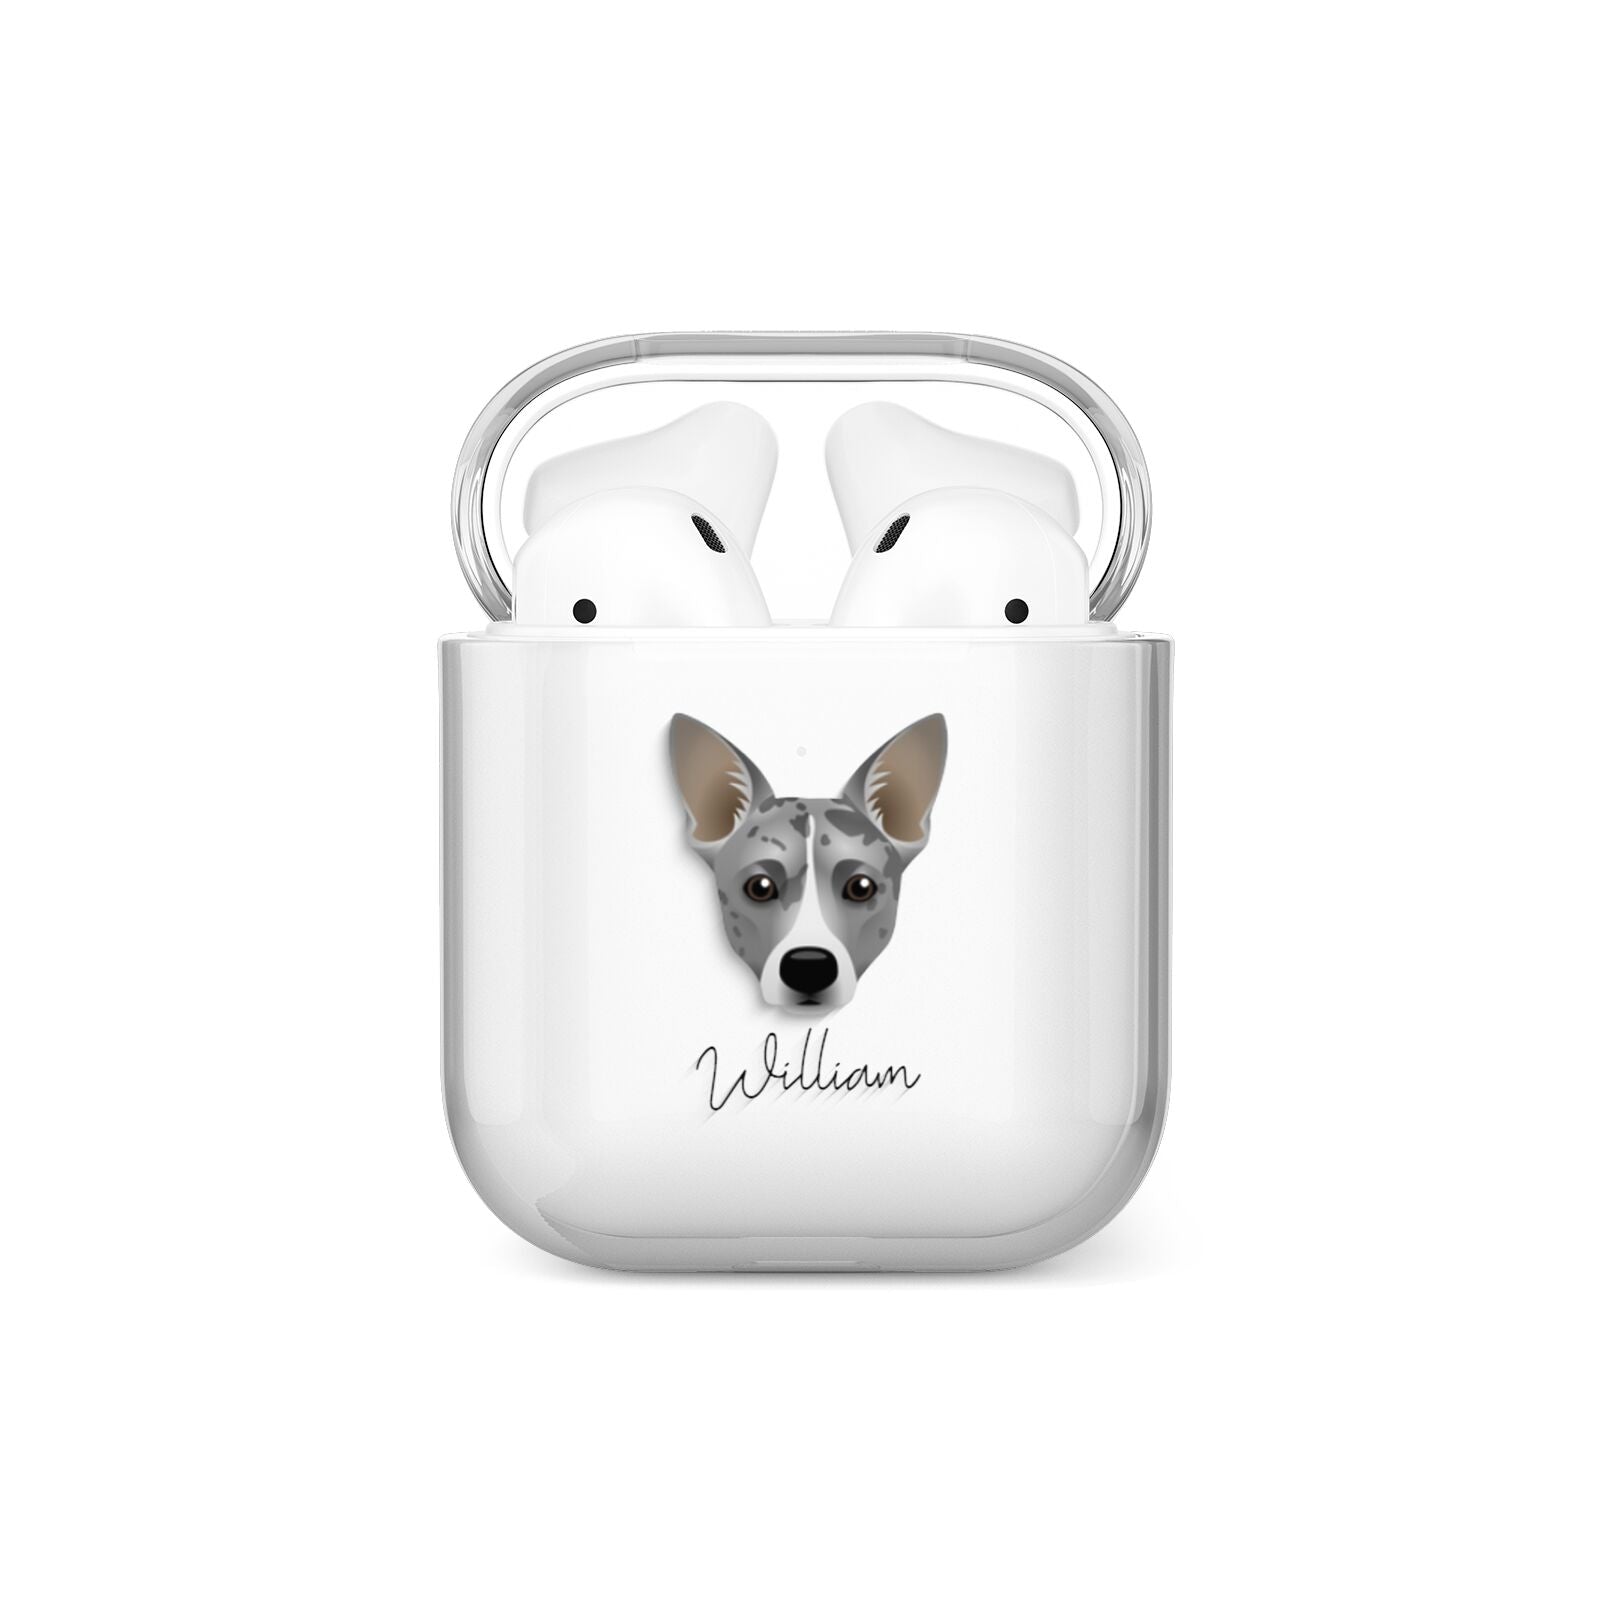 Cojack Personalised AirPods Case